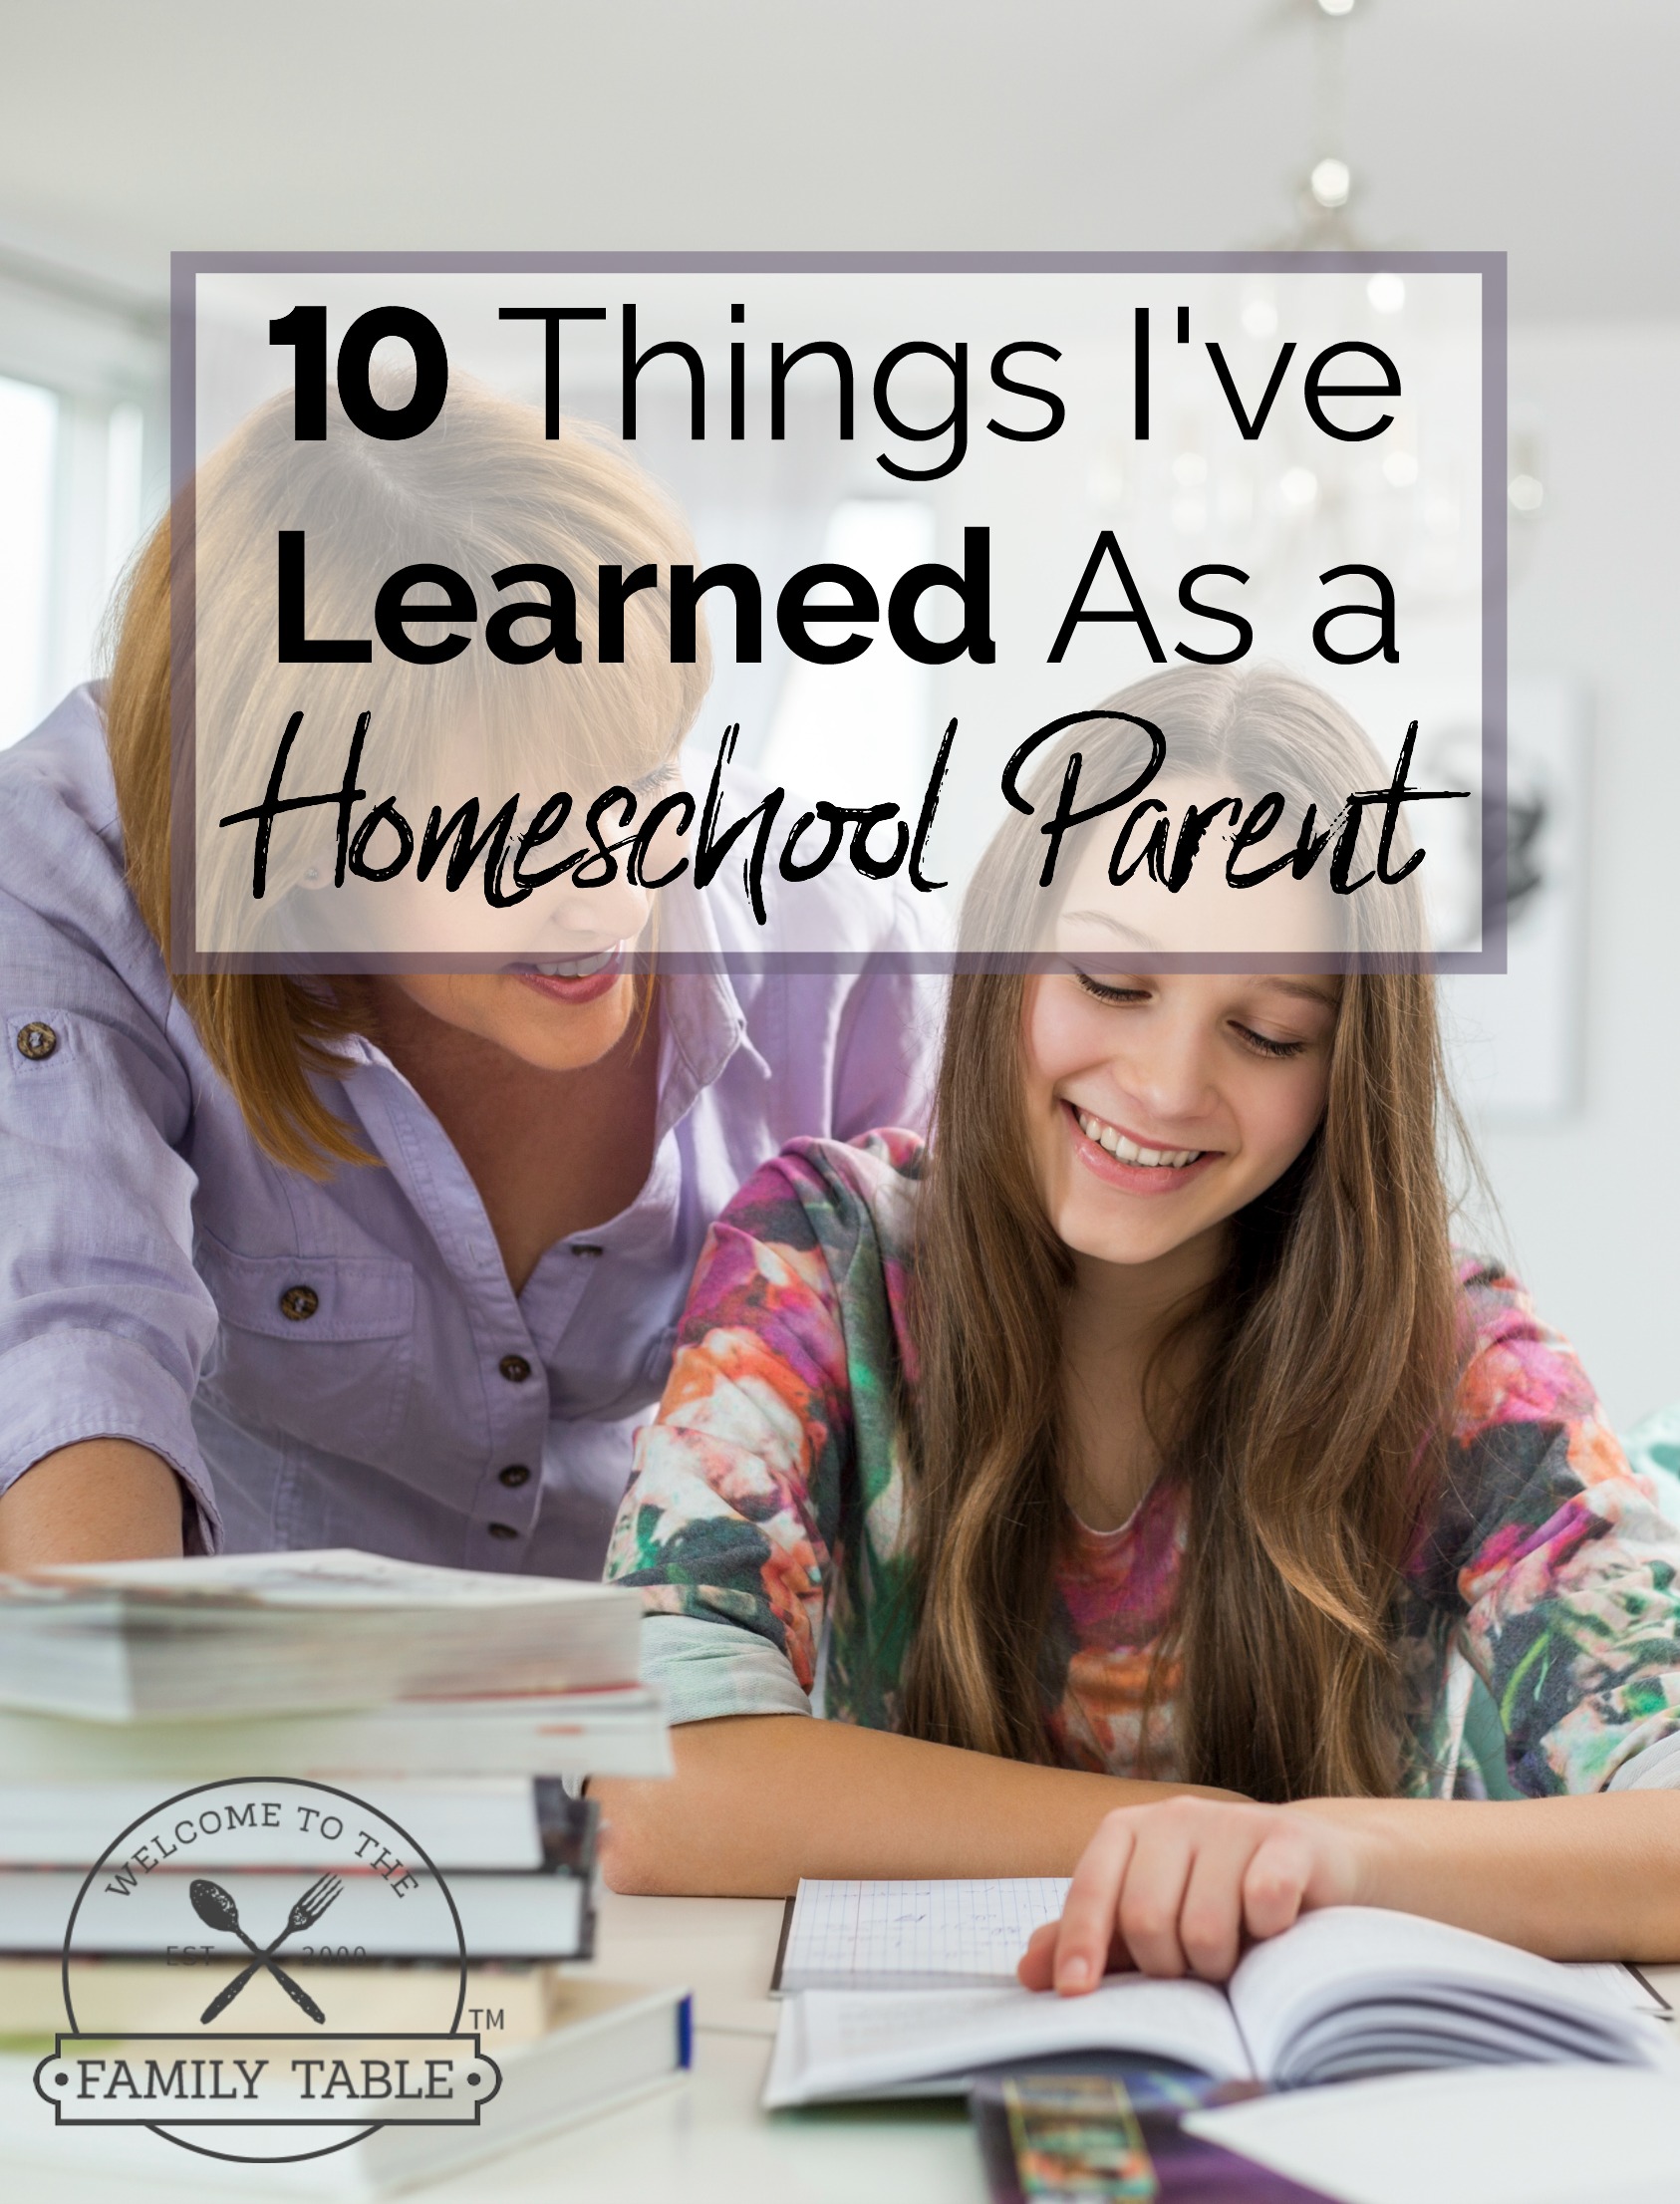 10 Things I’ve Learned As a Homeschool Parent